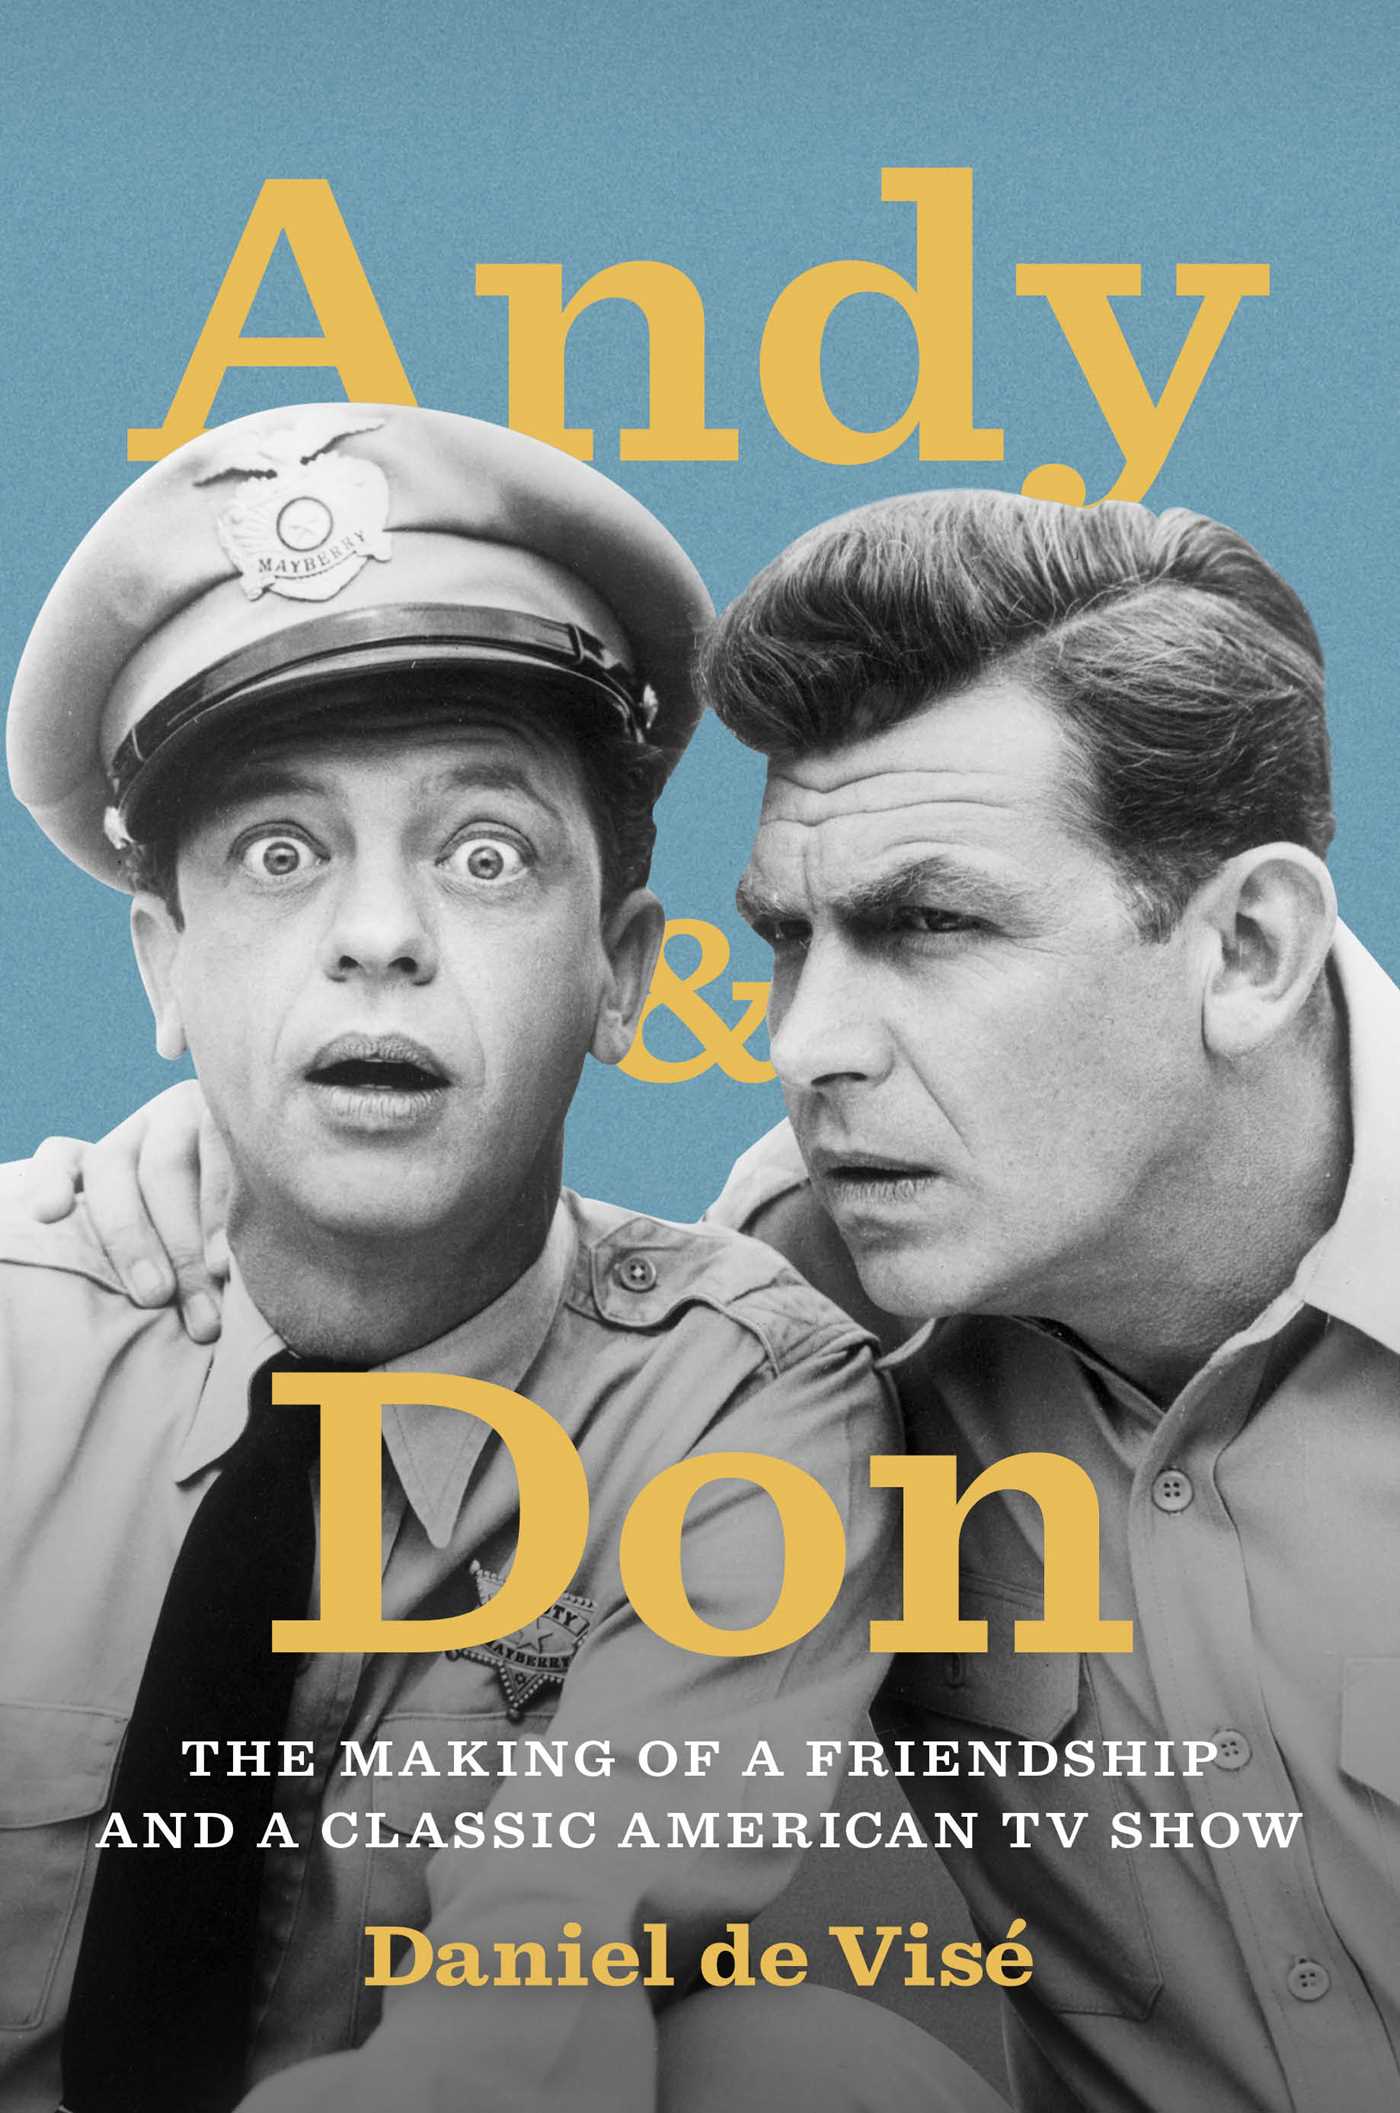 Andy and Don : The Making of a Friendship and a Classic American TV Show (Hardcover) - image 1 of 1